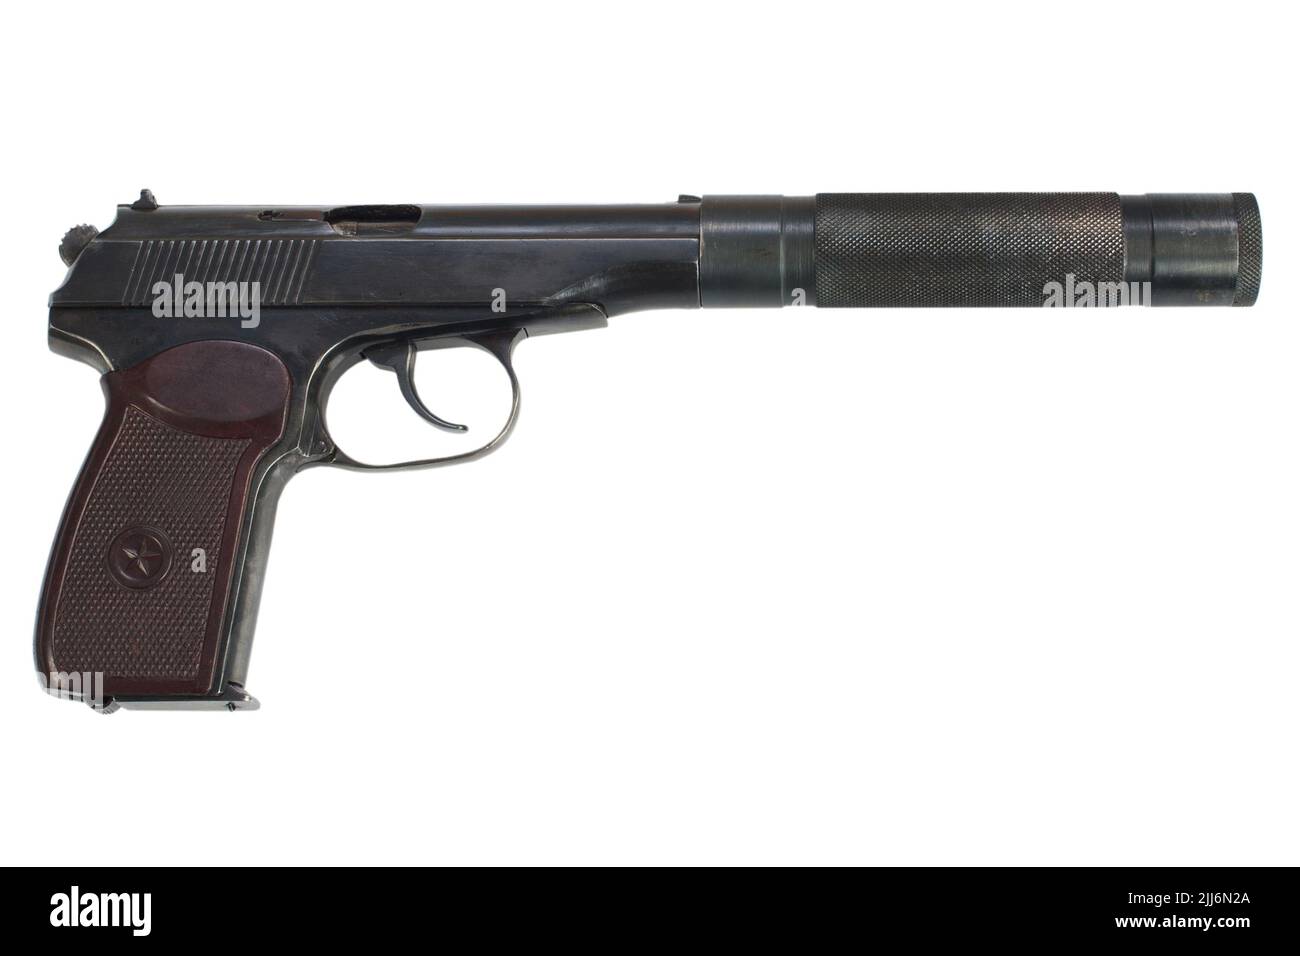 USSR Makarov pistol with silencer isolated Stock Photo